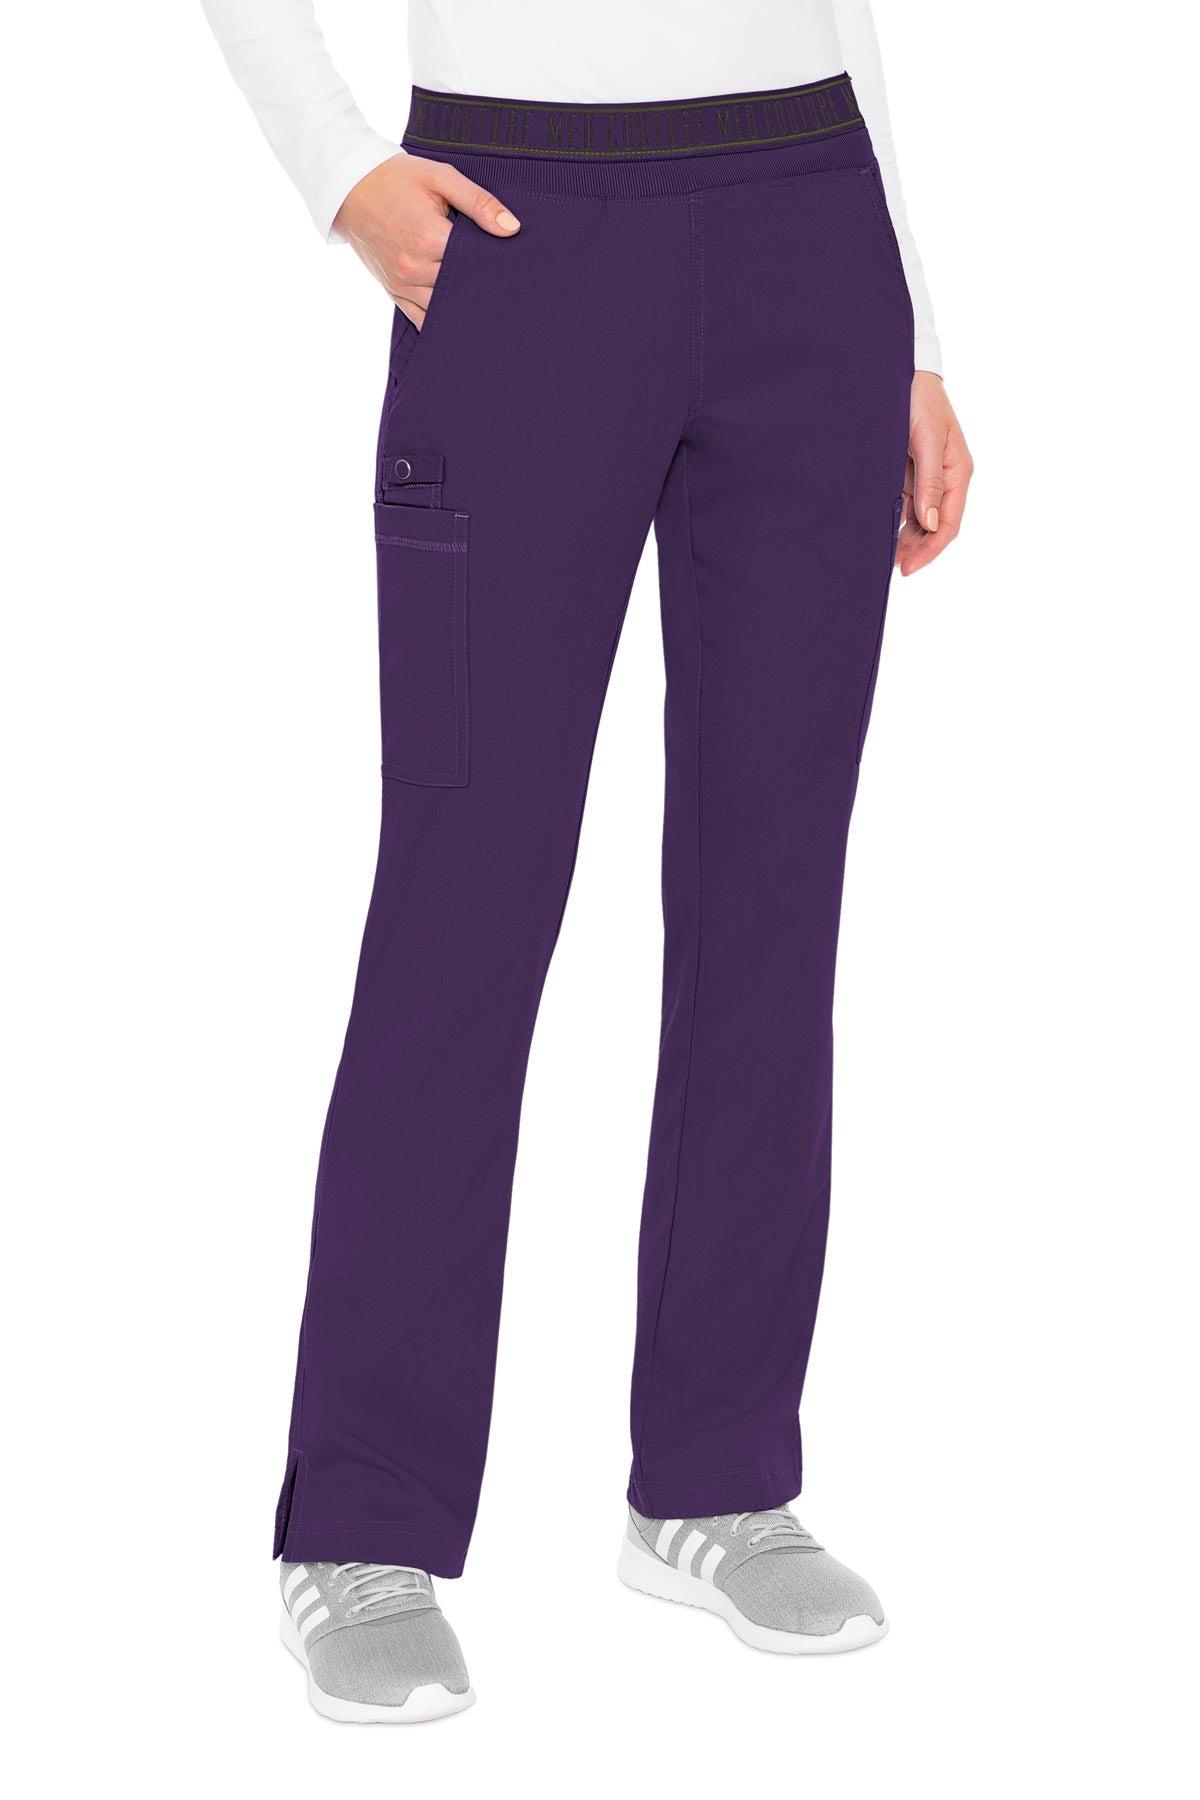 MED COUTURE Yoga 2 Cargo Pocket Pant TALL